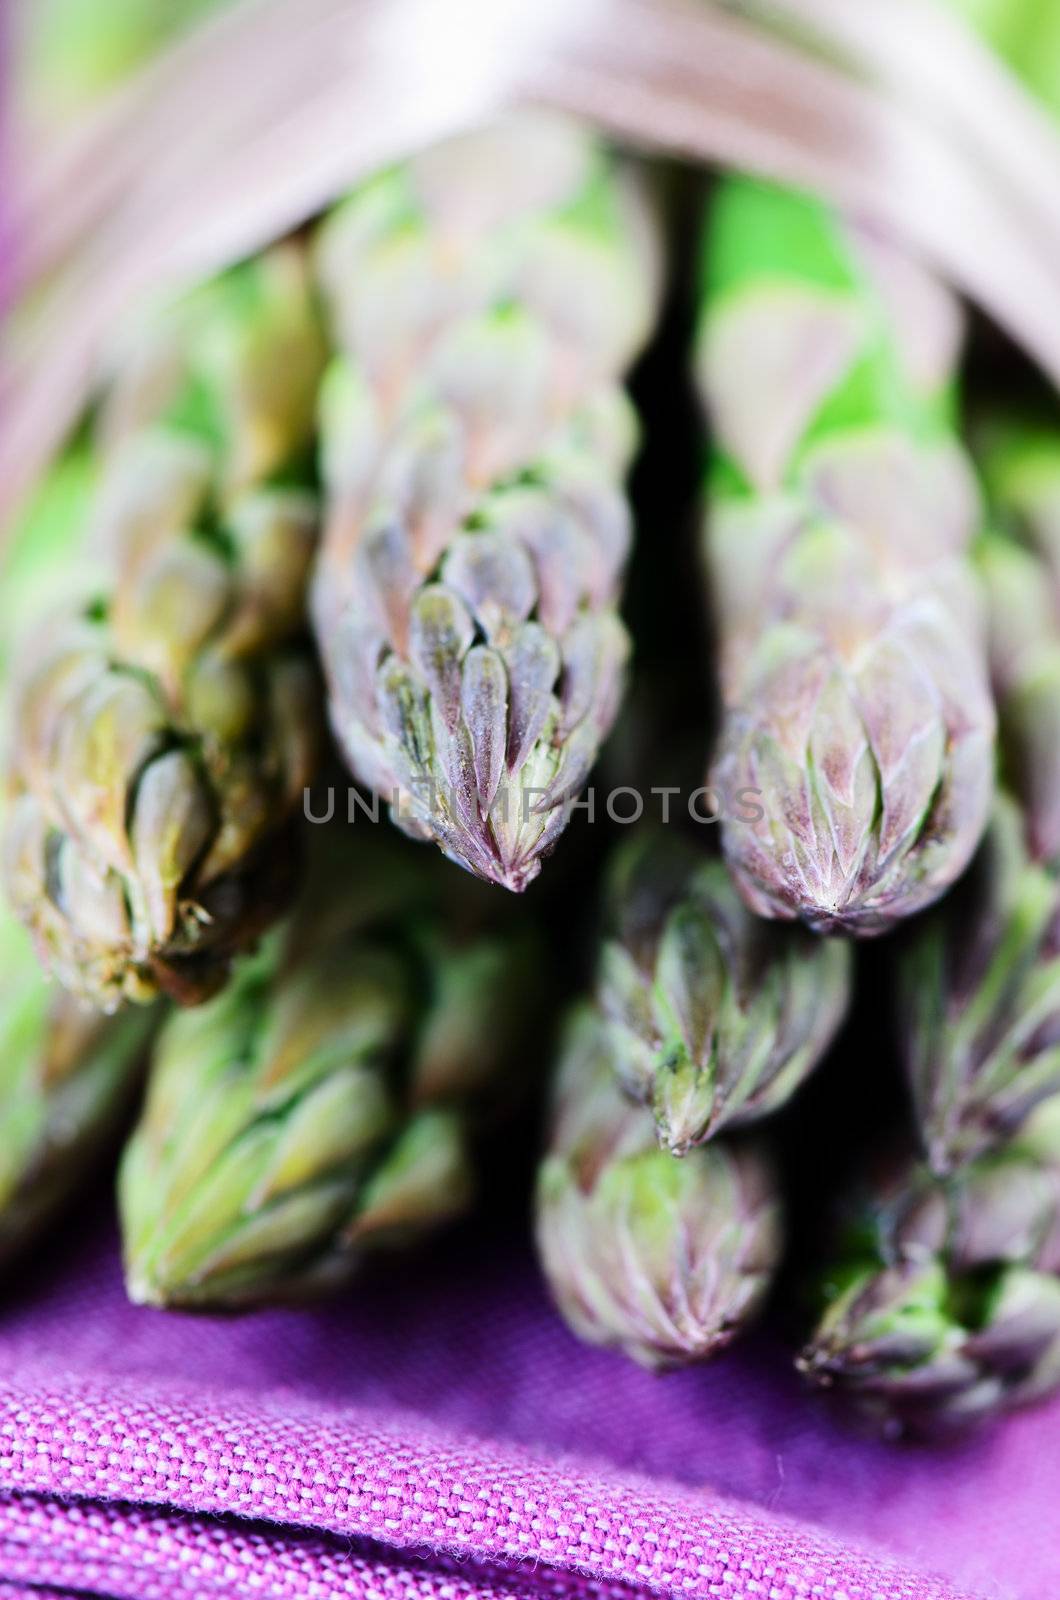 Bunch of asparagus on napkin close up